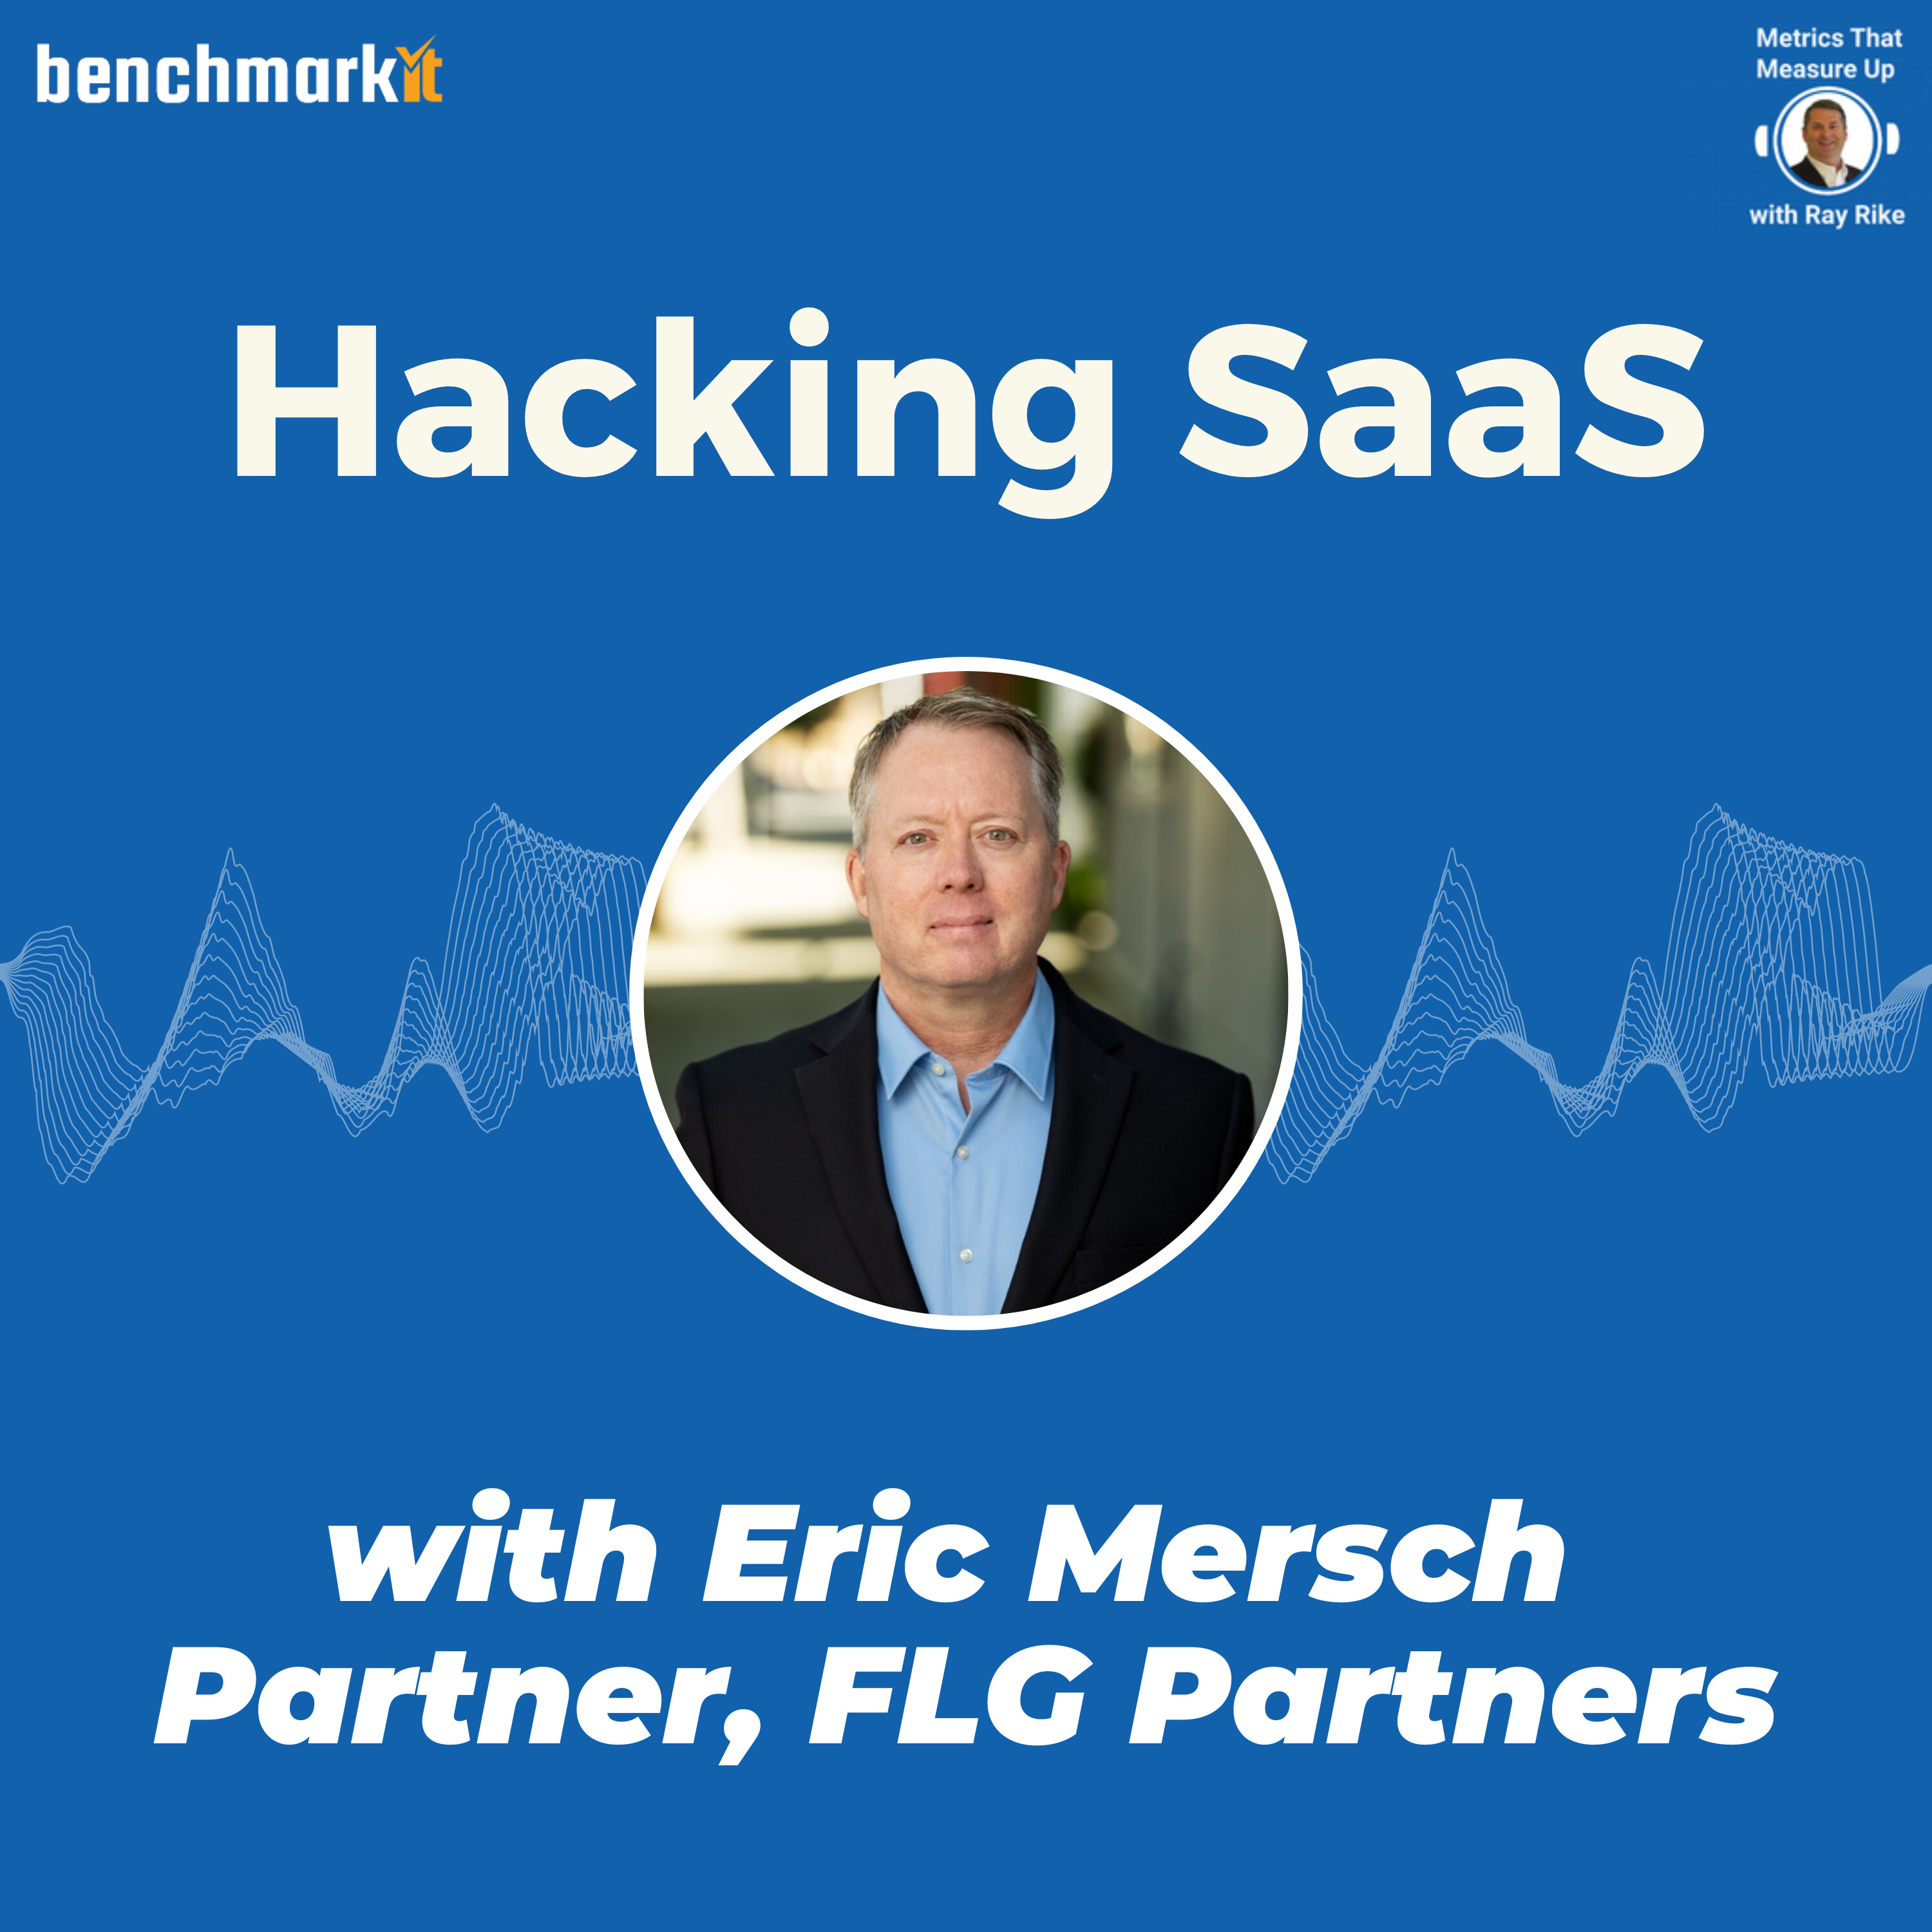 Hacking SaaS - with Eric Mersch, author and Partner FLG Partners